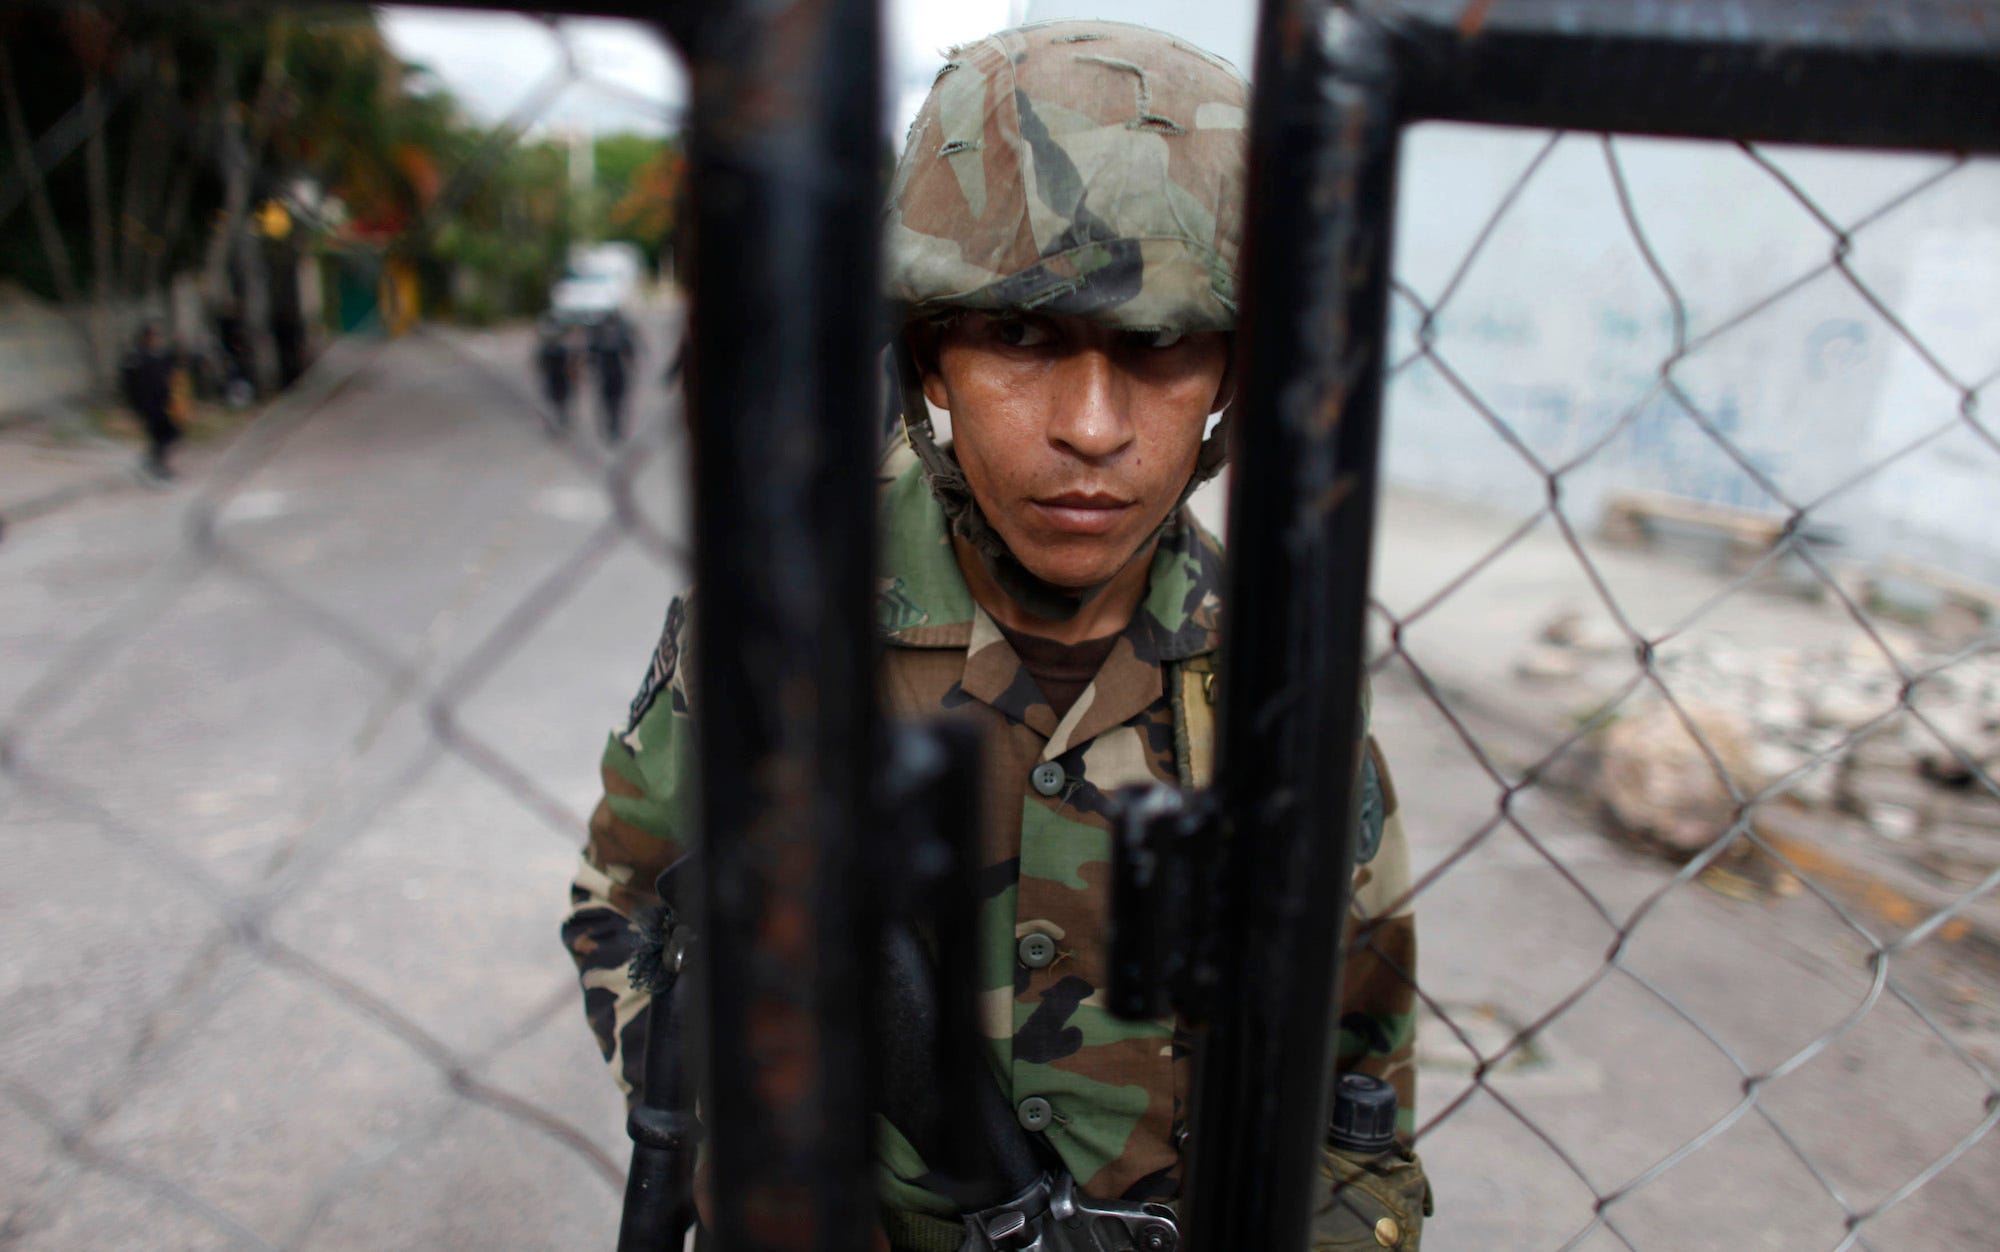 A soldier stands guard outside the Brazilian embassy in Tegucigalpa September 24, 2009.